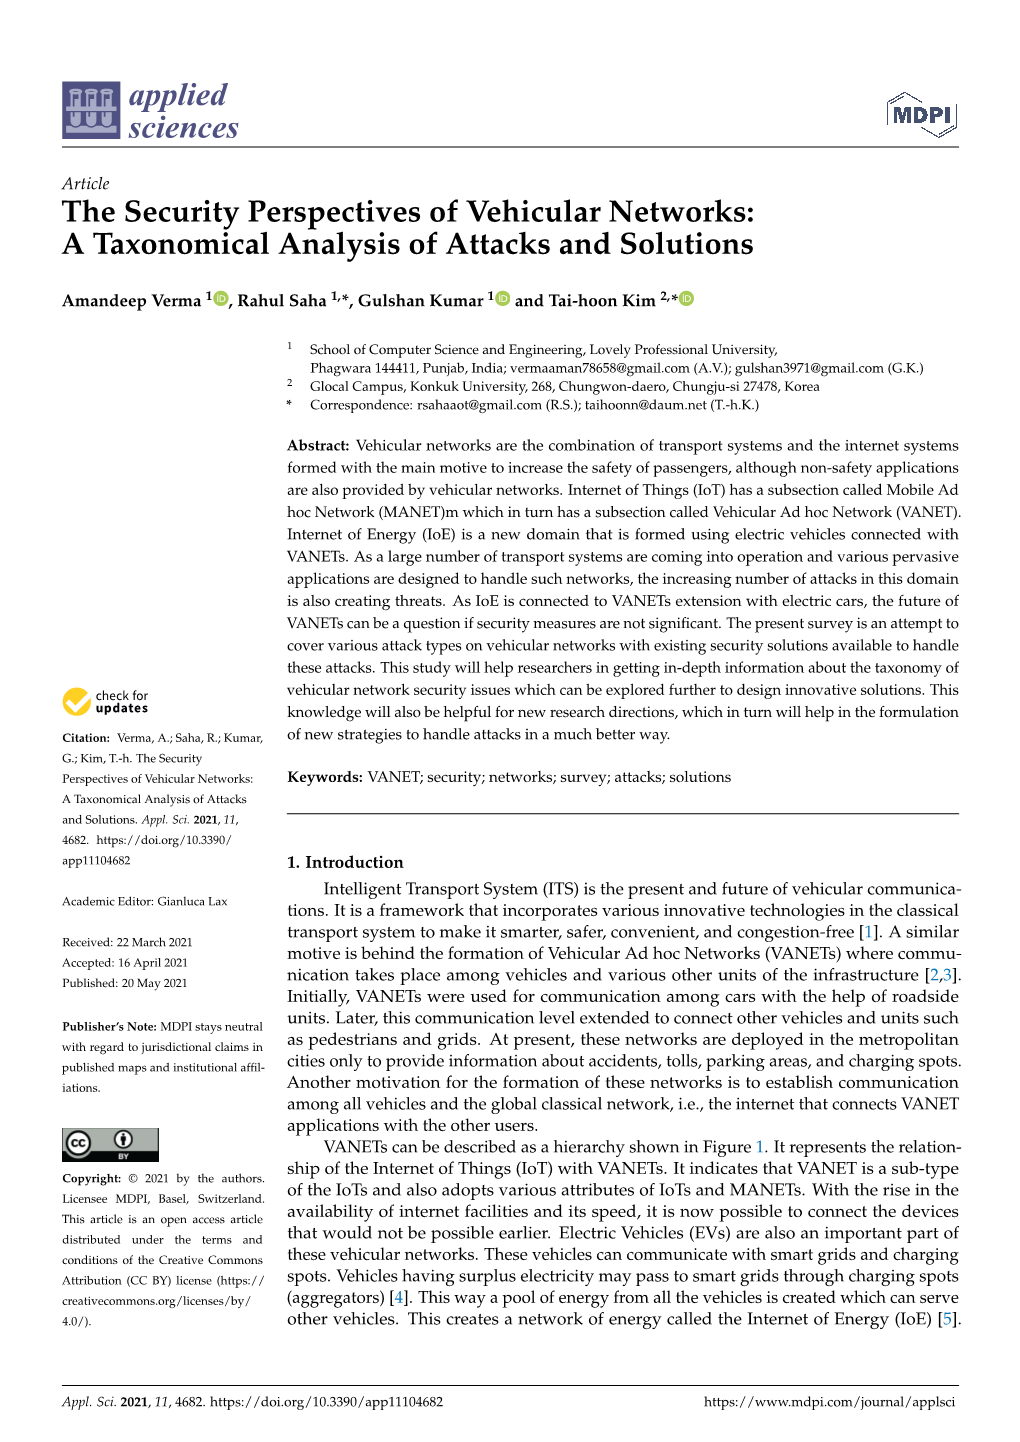 The Security Perspectives of Vehicular Networks: a Taxonomical Analysis of Attacks and Solutions